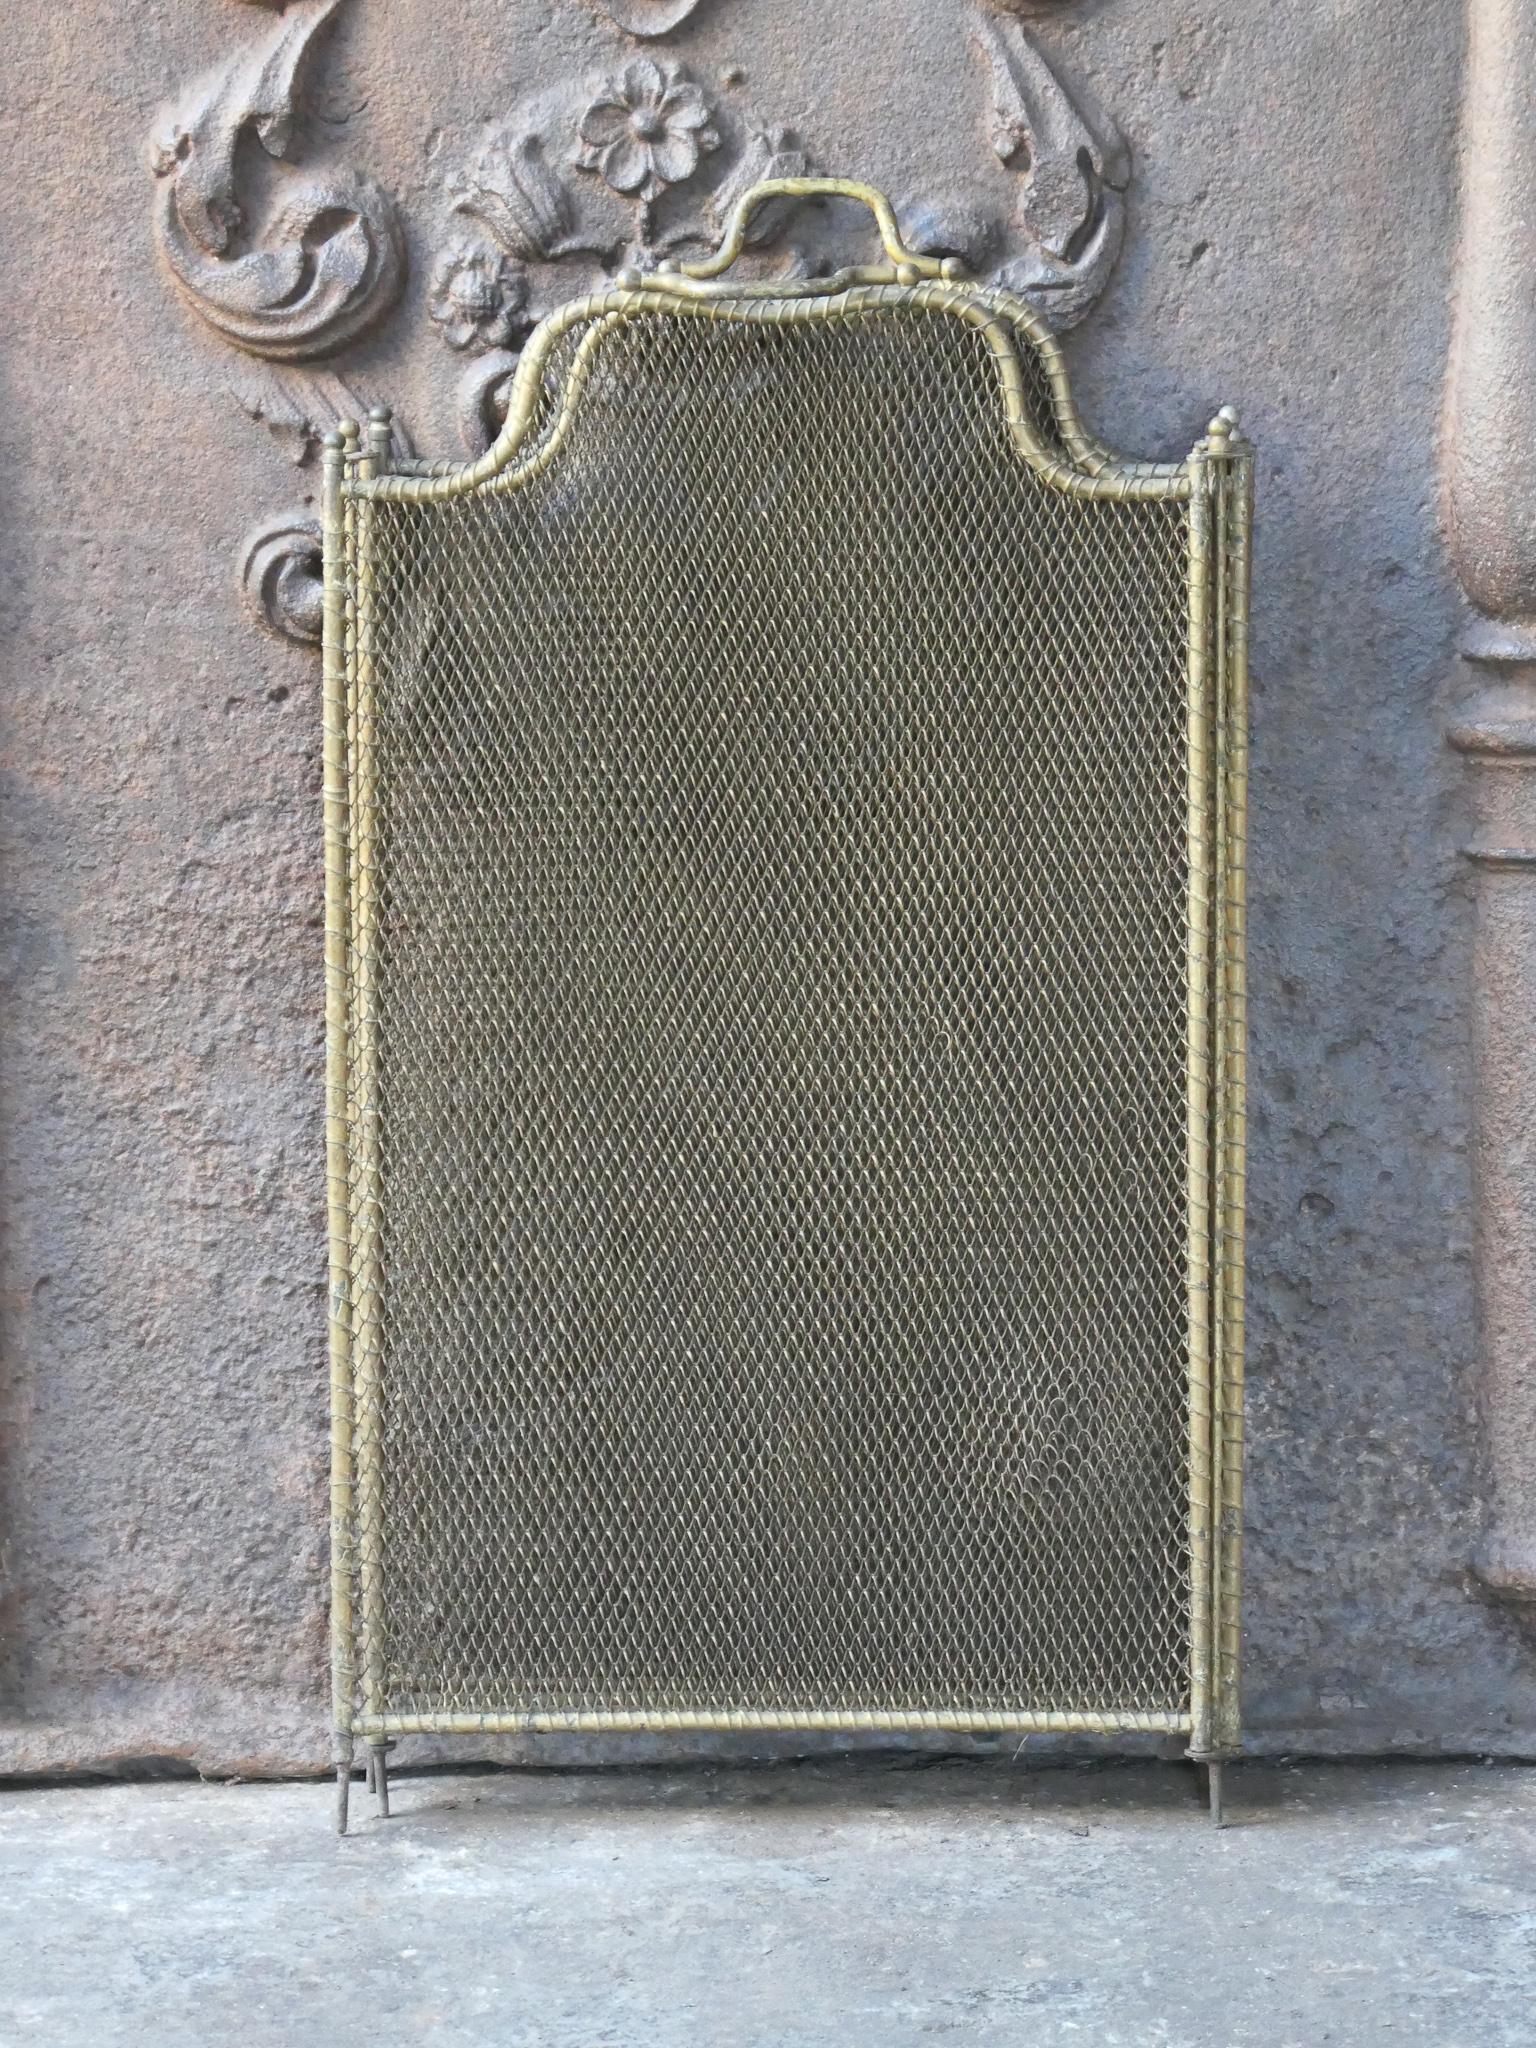 19th Century French Napoleon III 4-panel fireplace screen. The screen is made of brass, iron and iron mesh. It is in a good condition and is fit for use in front of the fireplace.